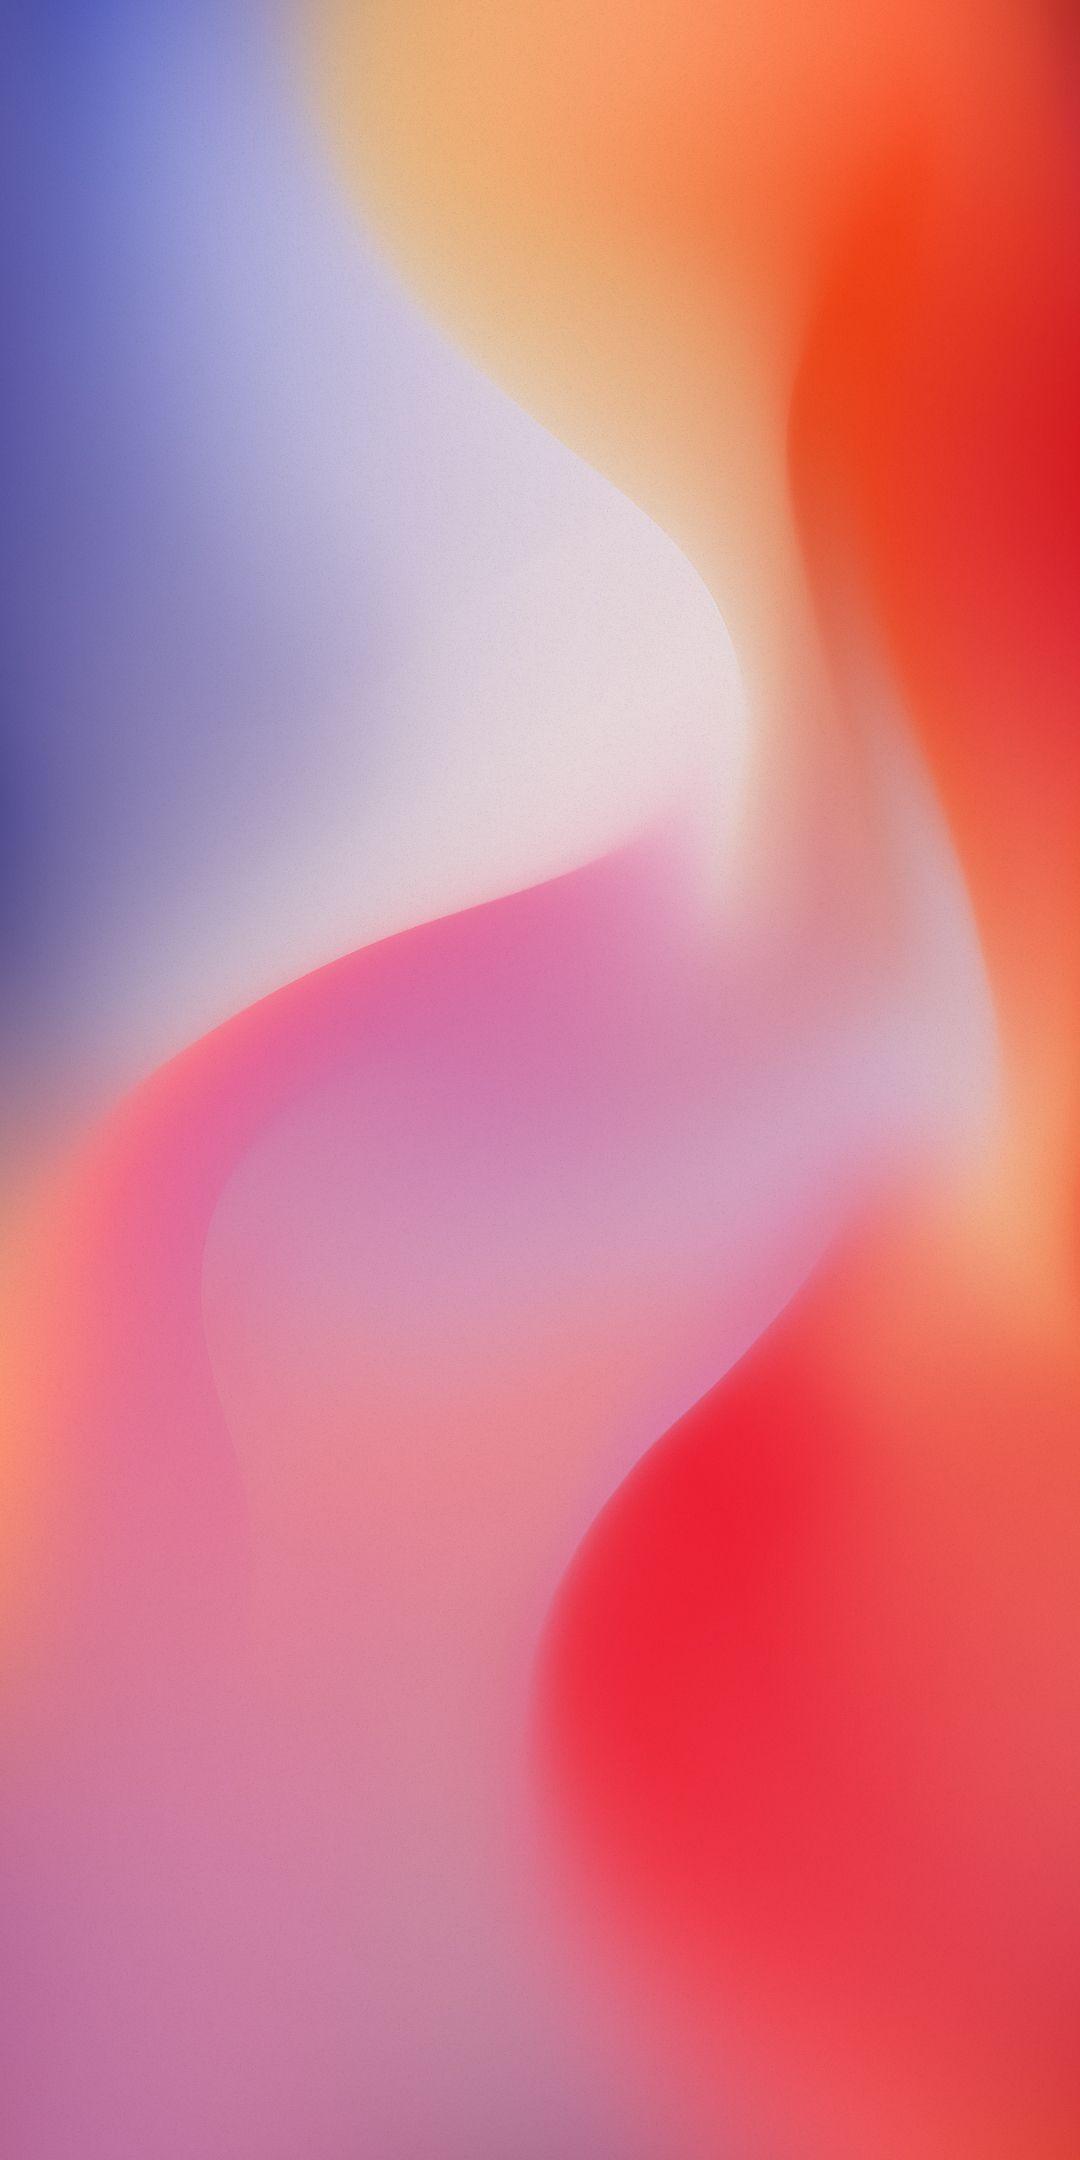 Redmi 6 Wallpapers - Top Free Redmi 6 Backgrounds - WallpaperAccess